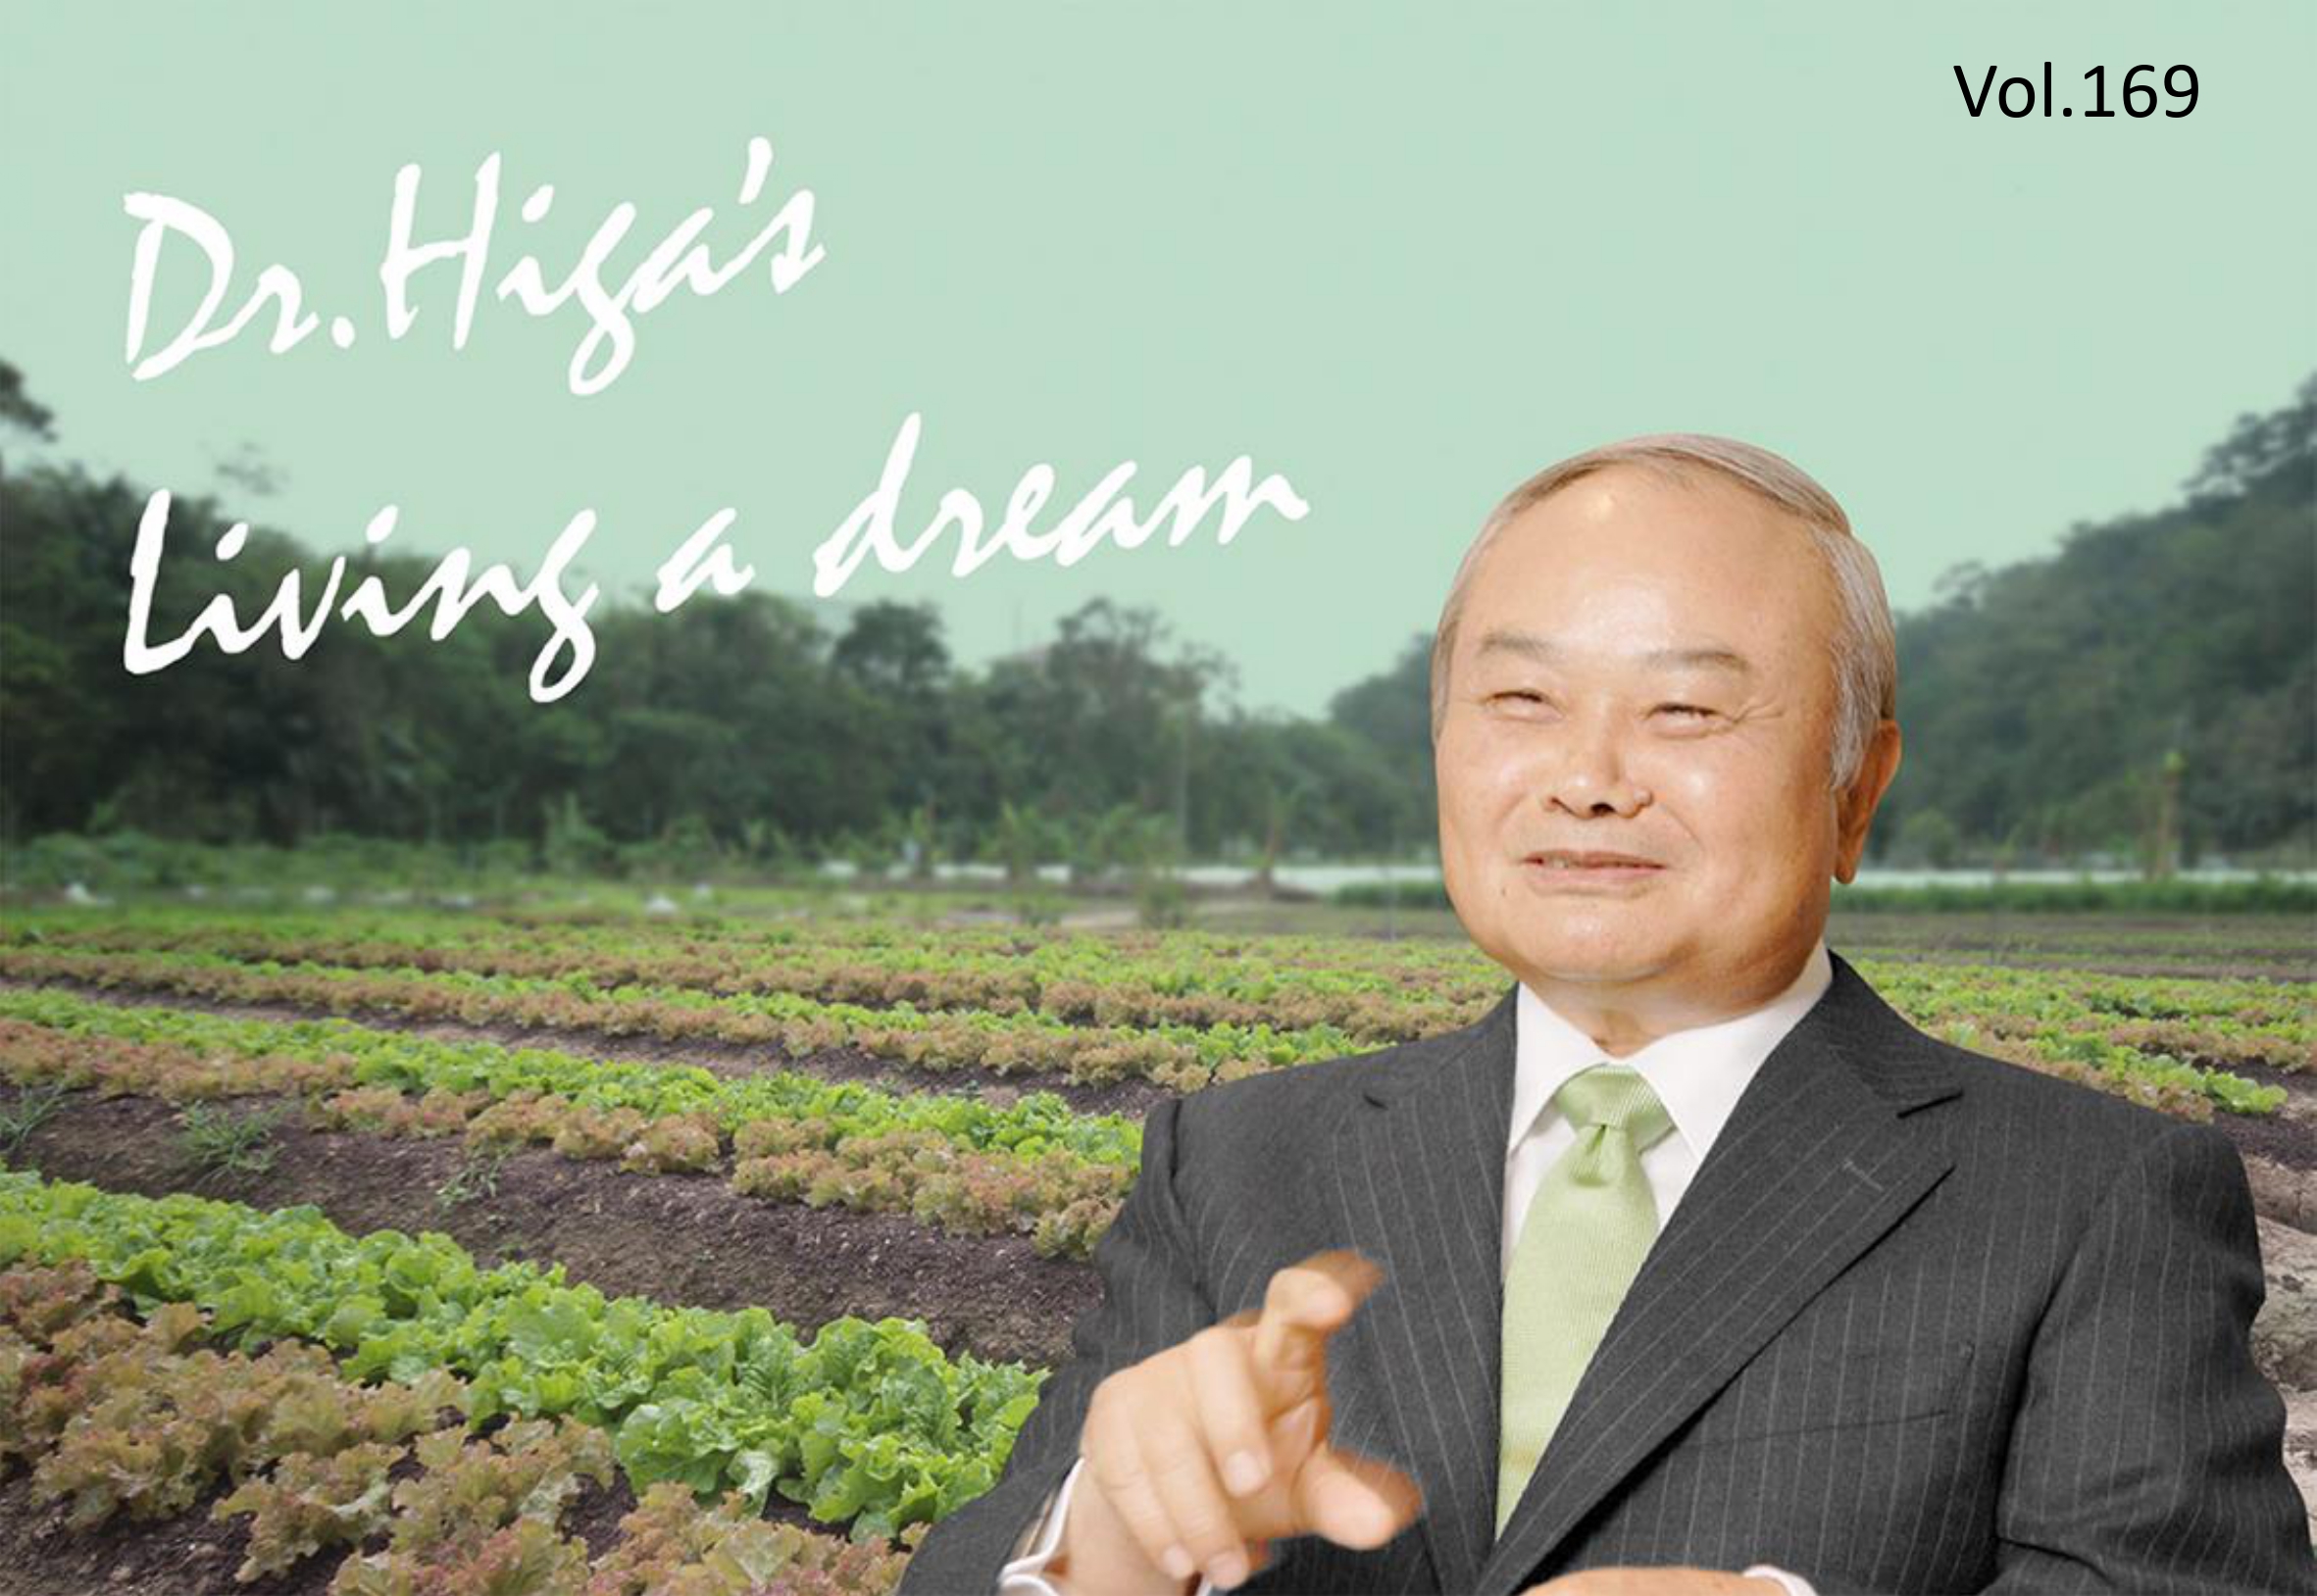 Dr. Higa's "Living a Dream": the latest article #169 is up!!!